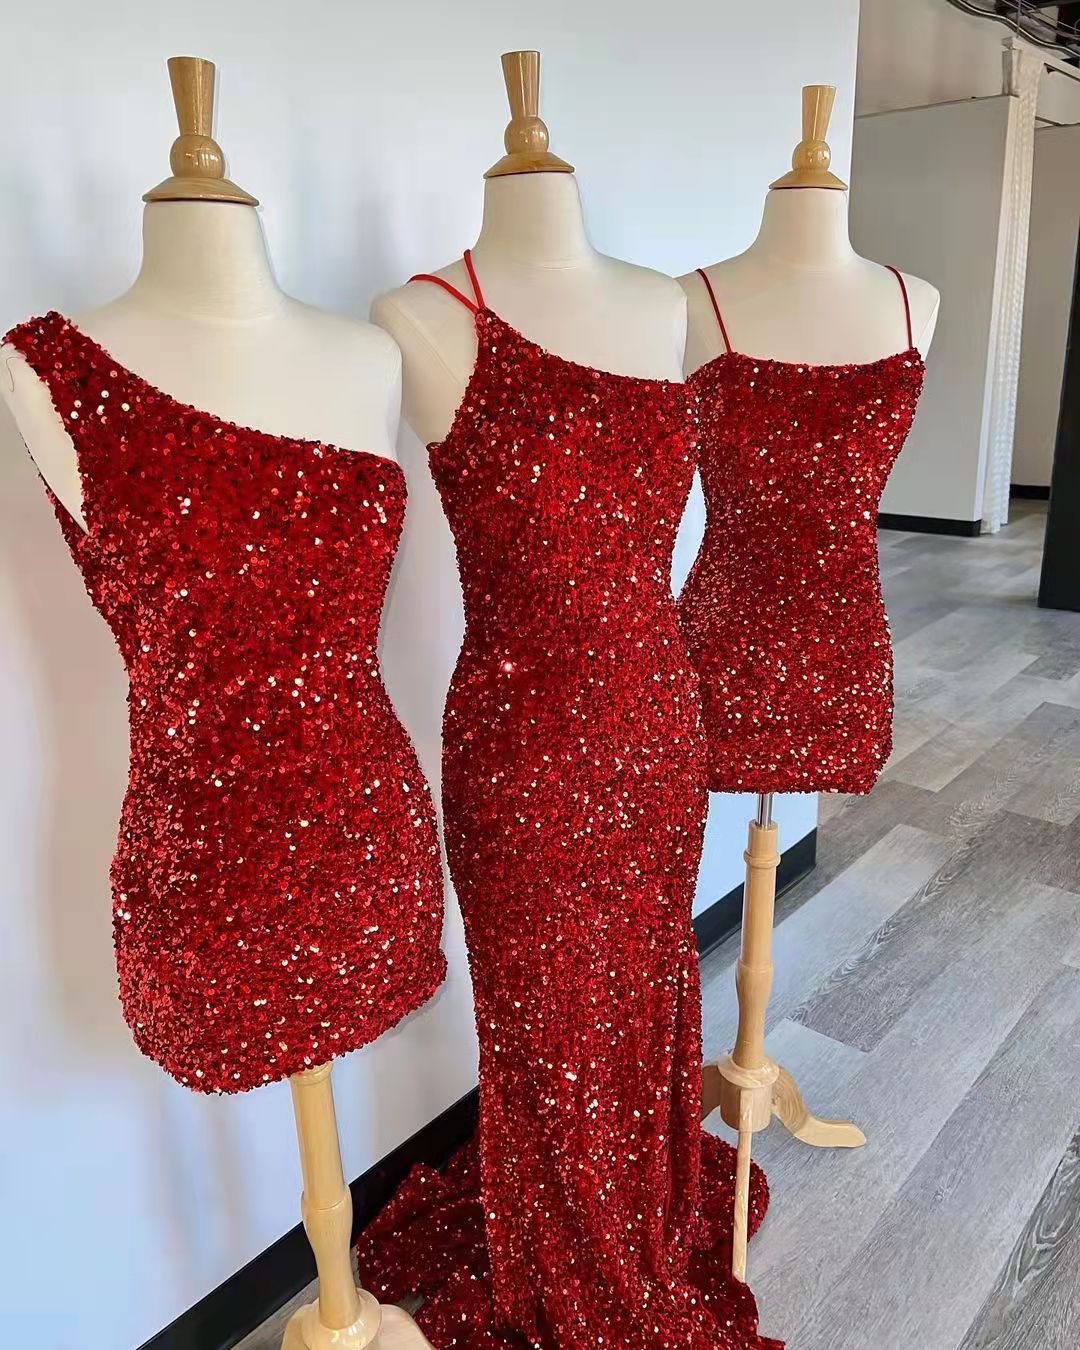 Mismatched Red Sequin Prom Dresses, Bridesmaid Dresses, Mermaid Prom Dresses, 2022 Prom Dresses, Shiny Prom Dresses, RC023